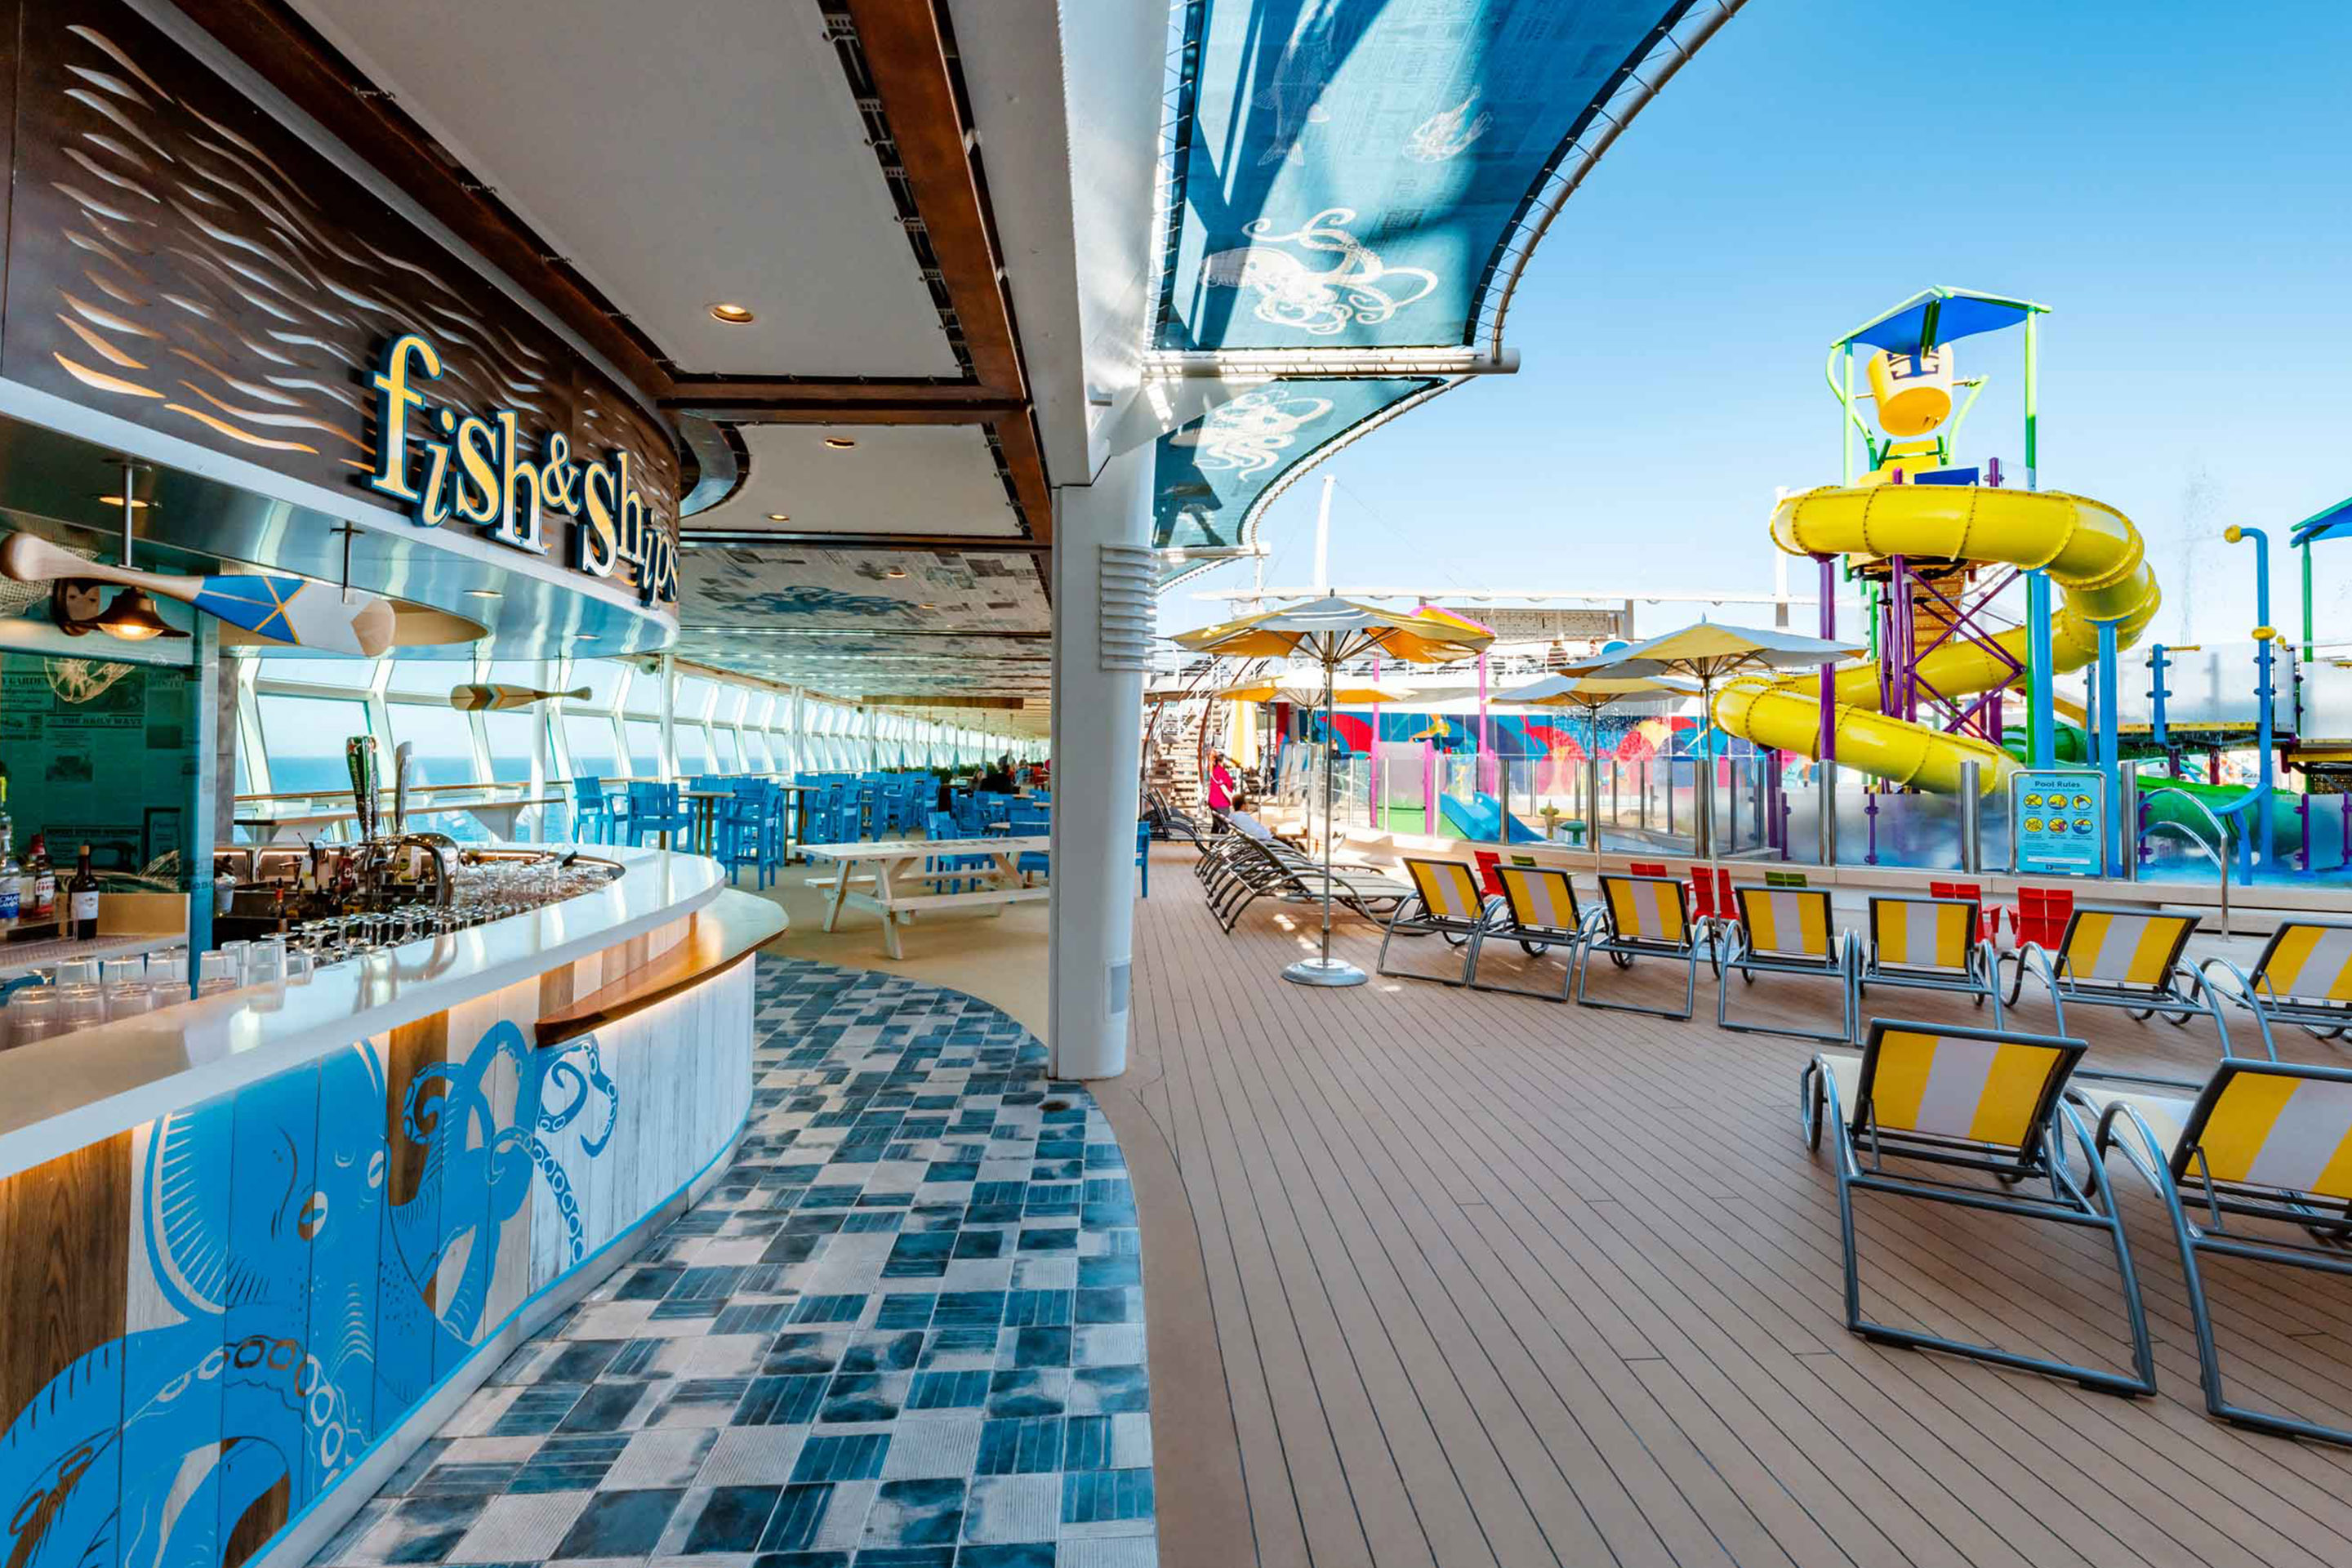 Fish & Ships venue onboard the pool deck of Independence of the Seas